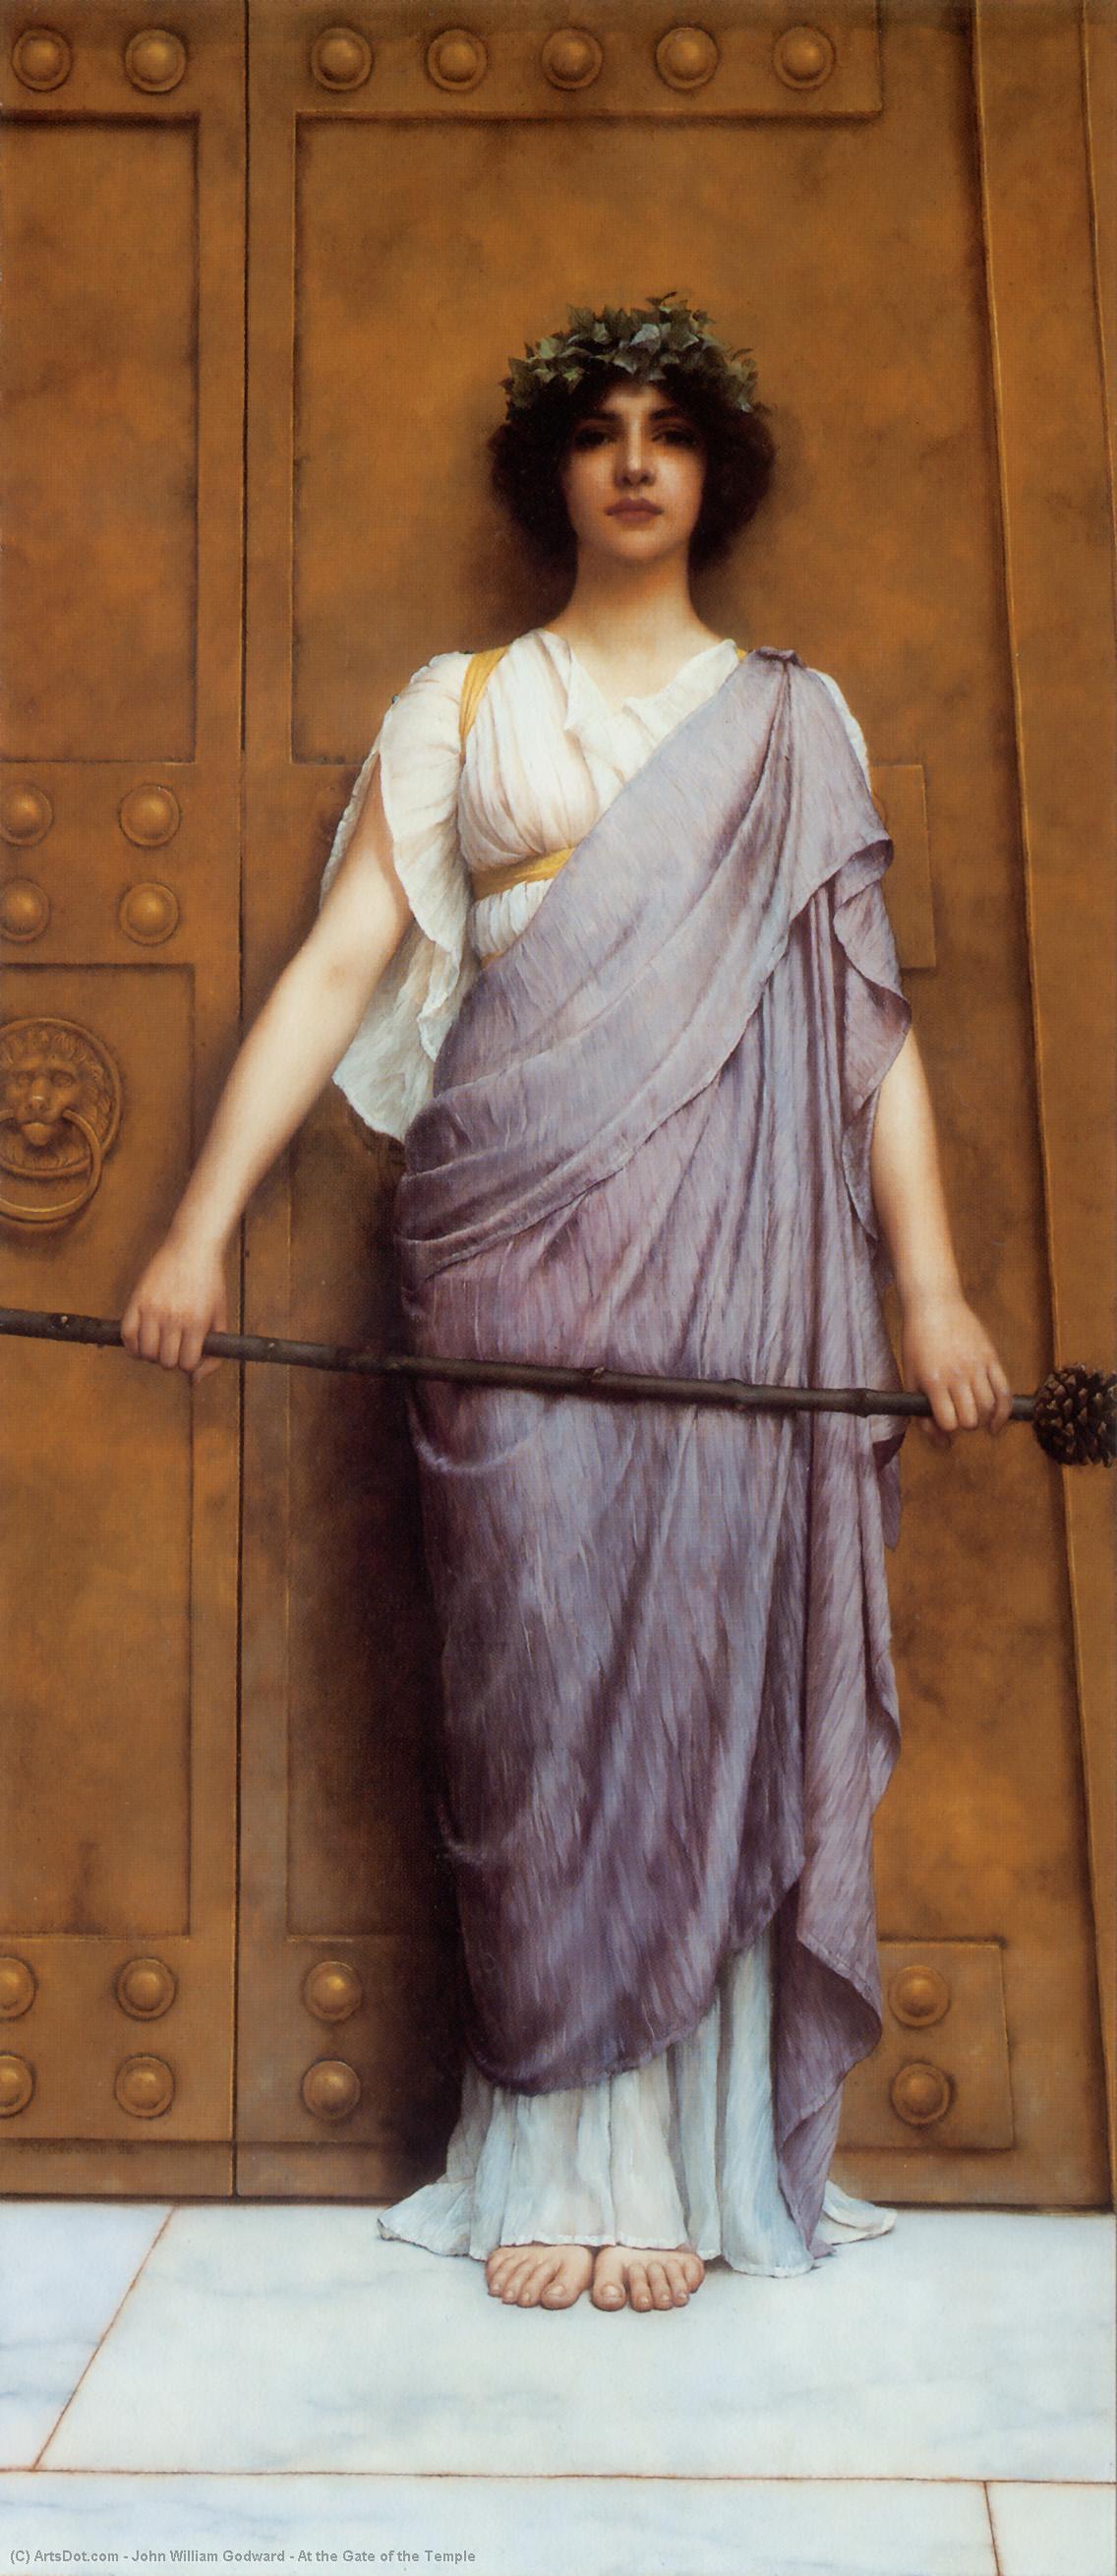 WikiOO.org - 백과 사전 - 회화, 삽화 John William Godward - At the Gate of the Temple